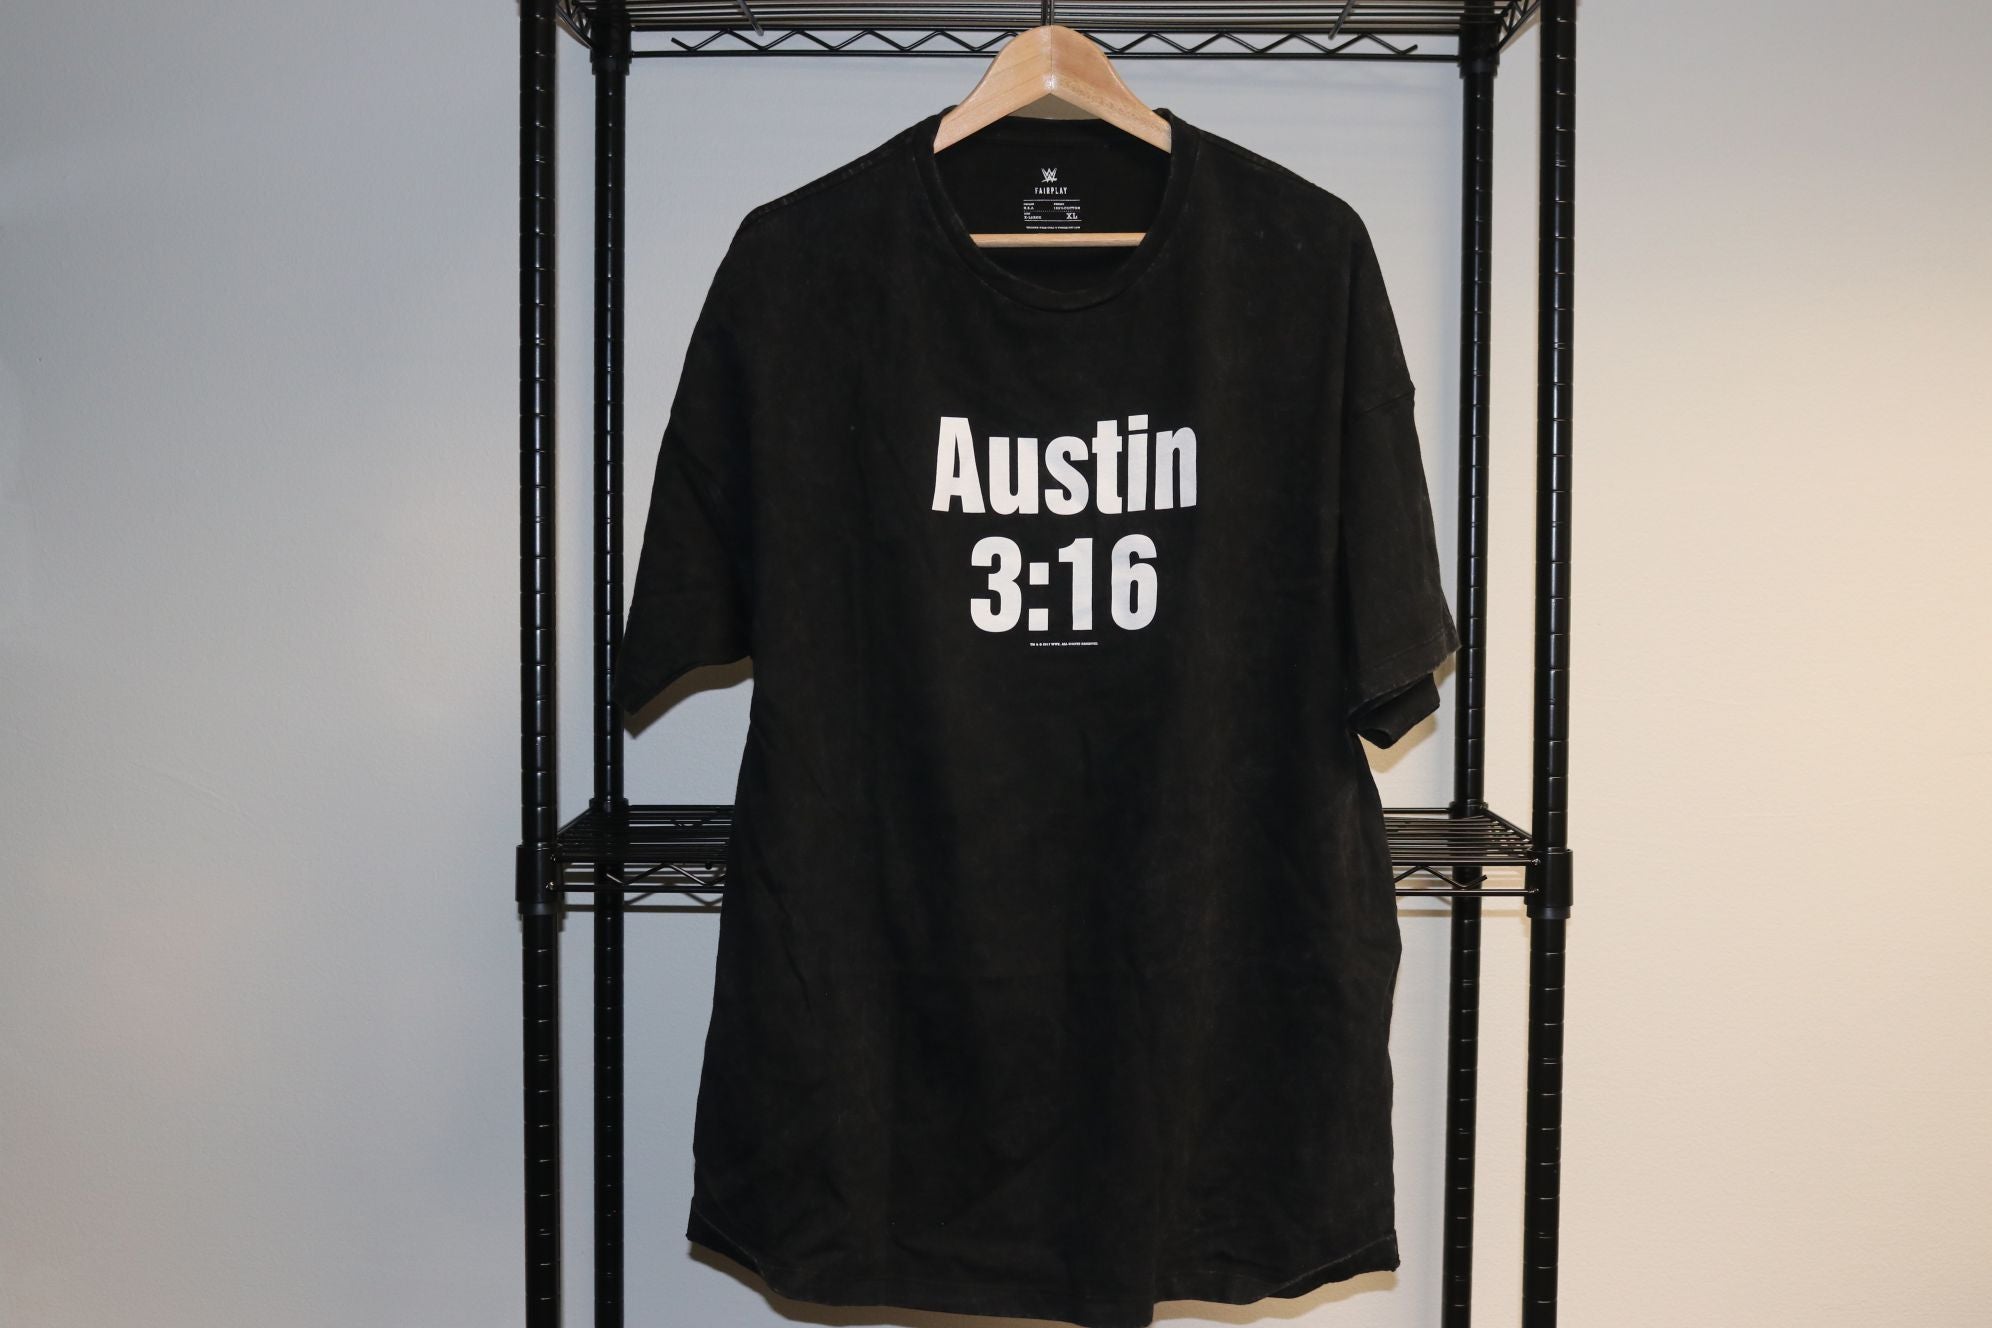 WWF Stone Cold Steve Austin 3:16 Texas Rattlesnake Wrestling All over Print Shirt Double Sided XL - Culture source